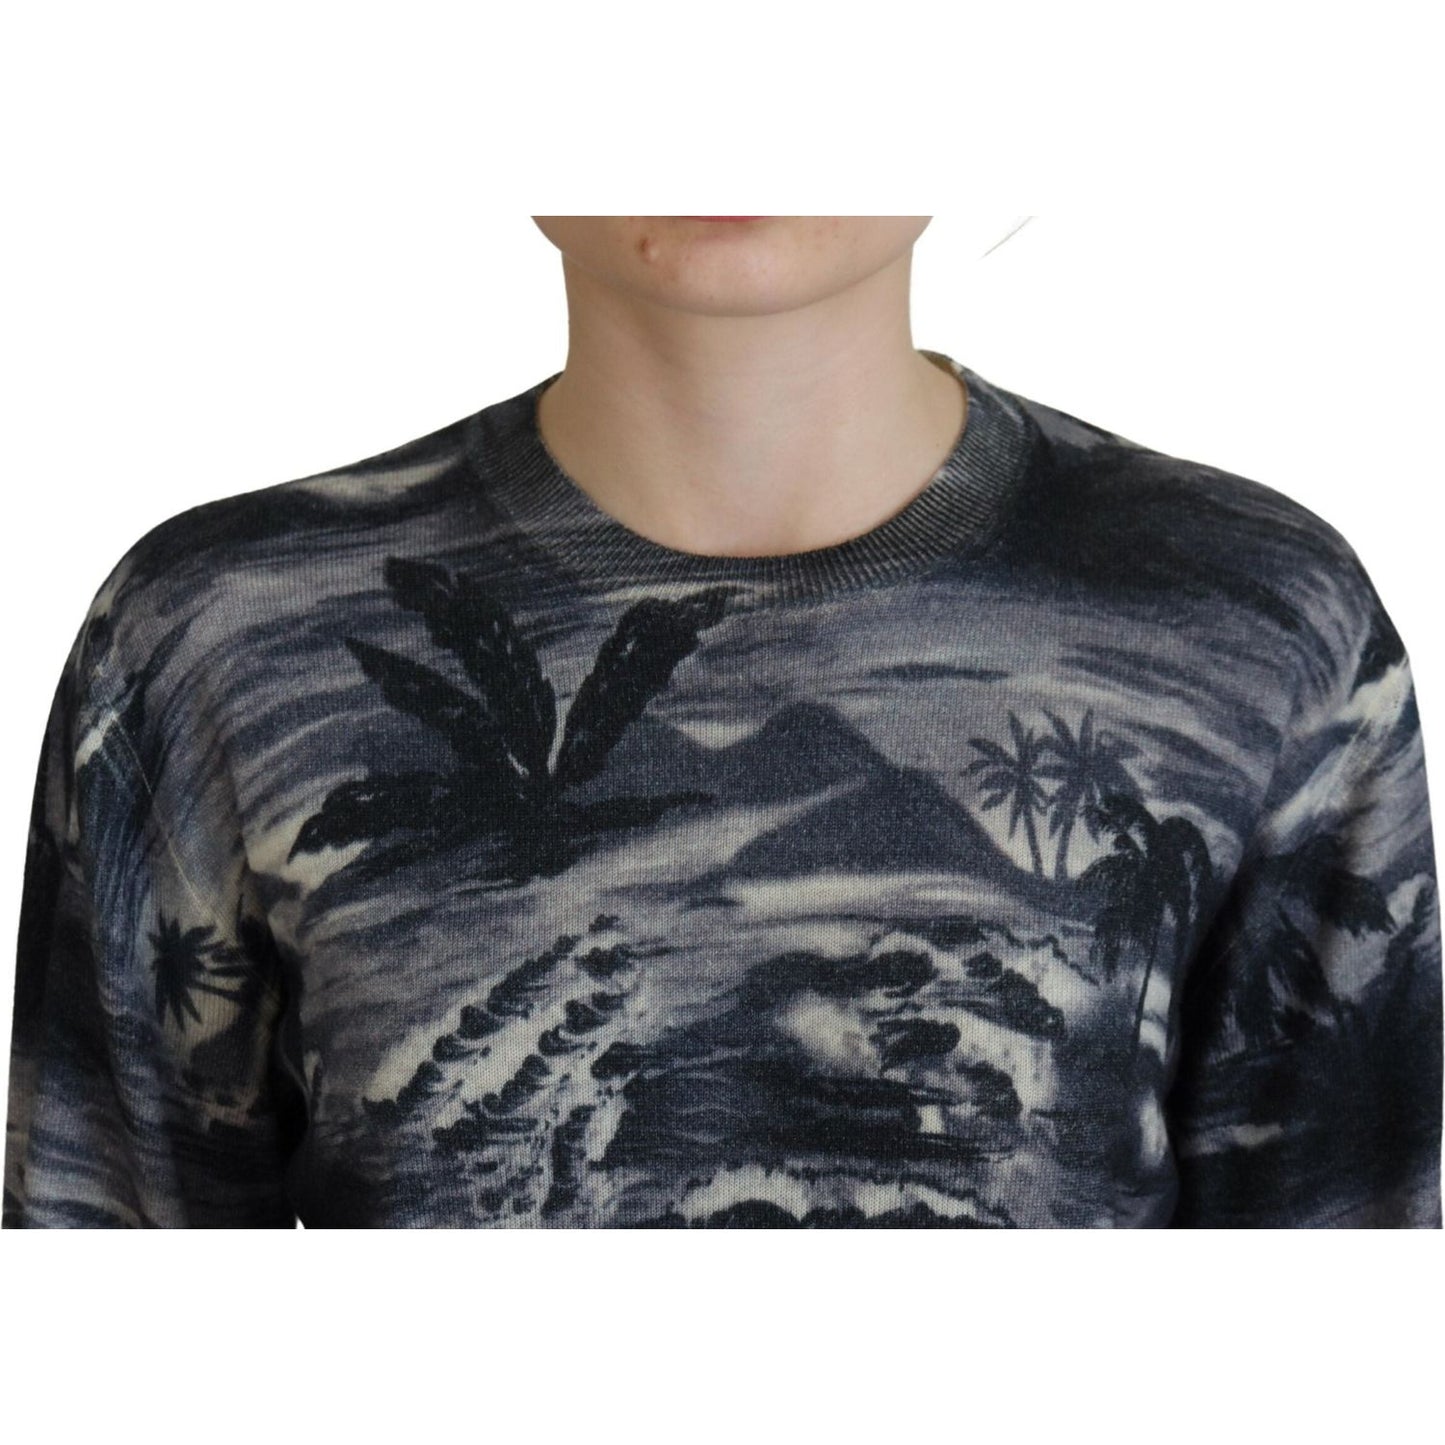 Dsquared² Black Long Sleeve Thunder Sky Print Casual Sweater black-long-sleeve-thunder-sky-print-casual-sweater